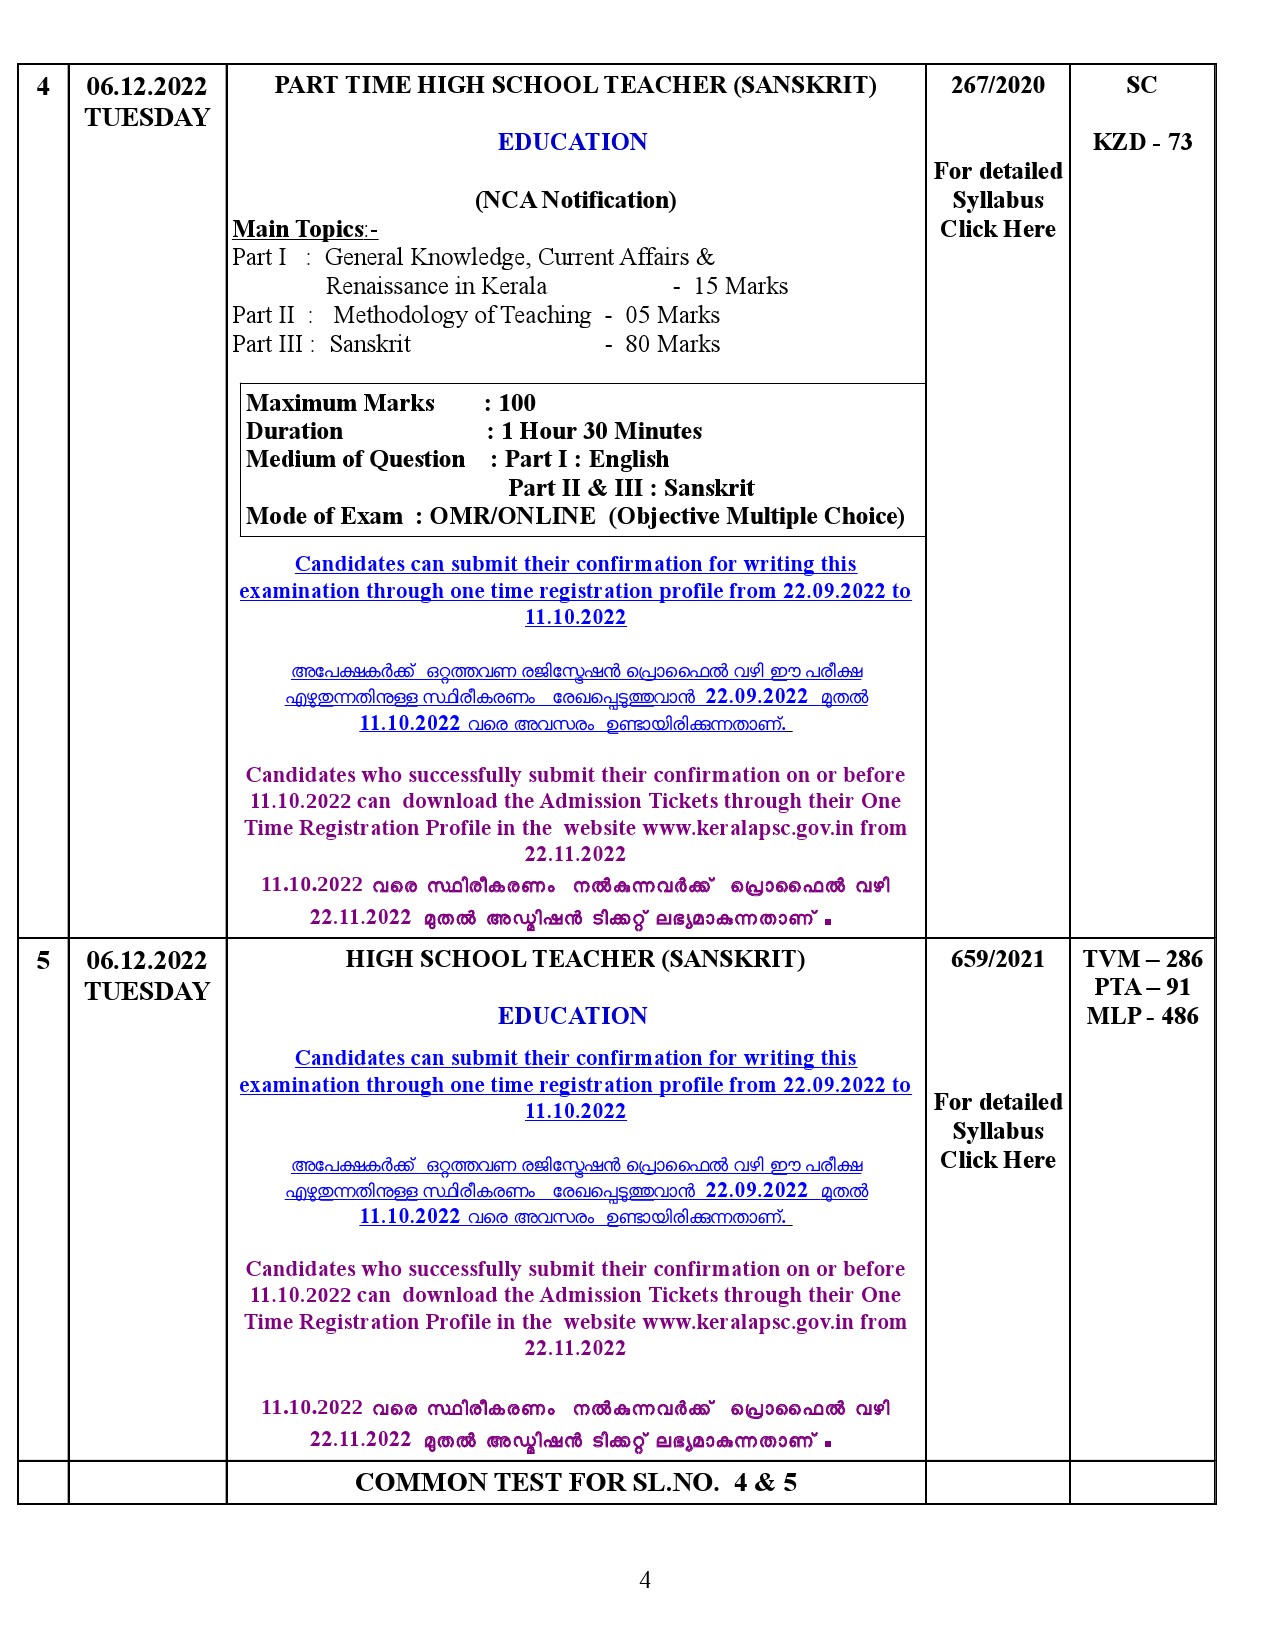 EXAMINATION PROGRAMME FOR THE MONTH OF DECEMBER 2022 - Notification Image 4